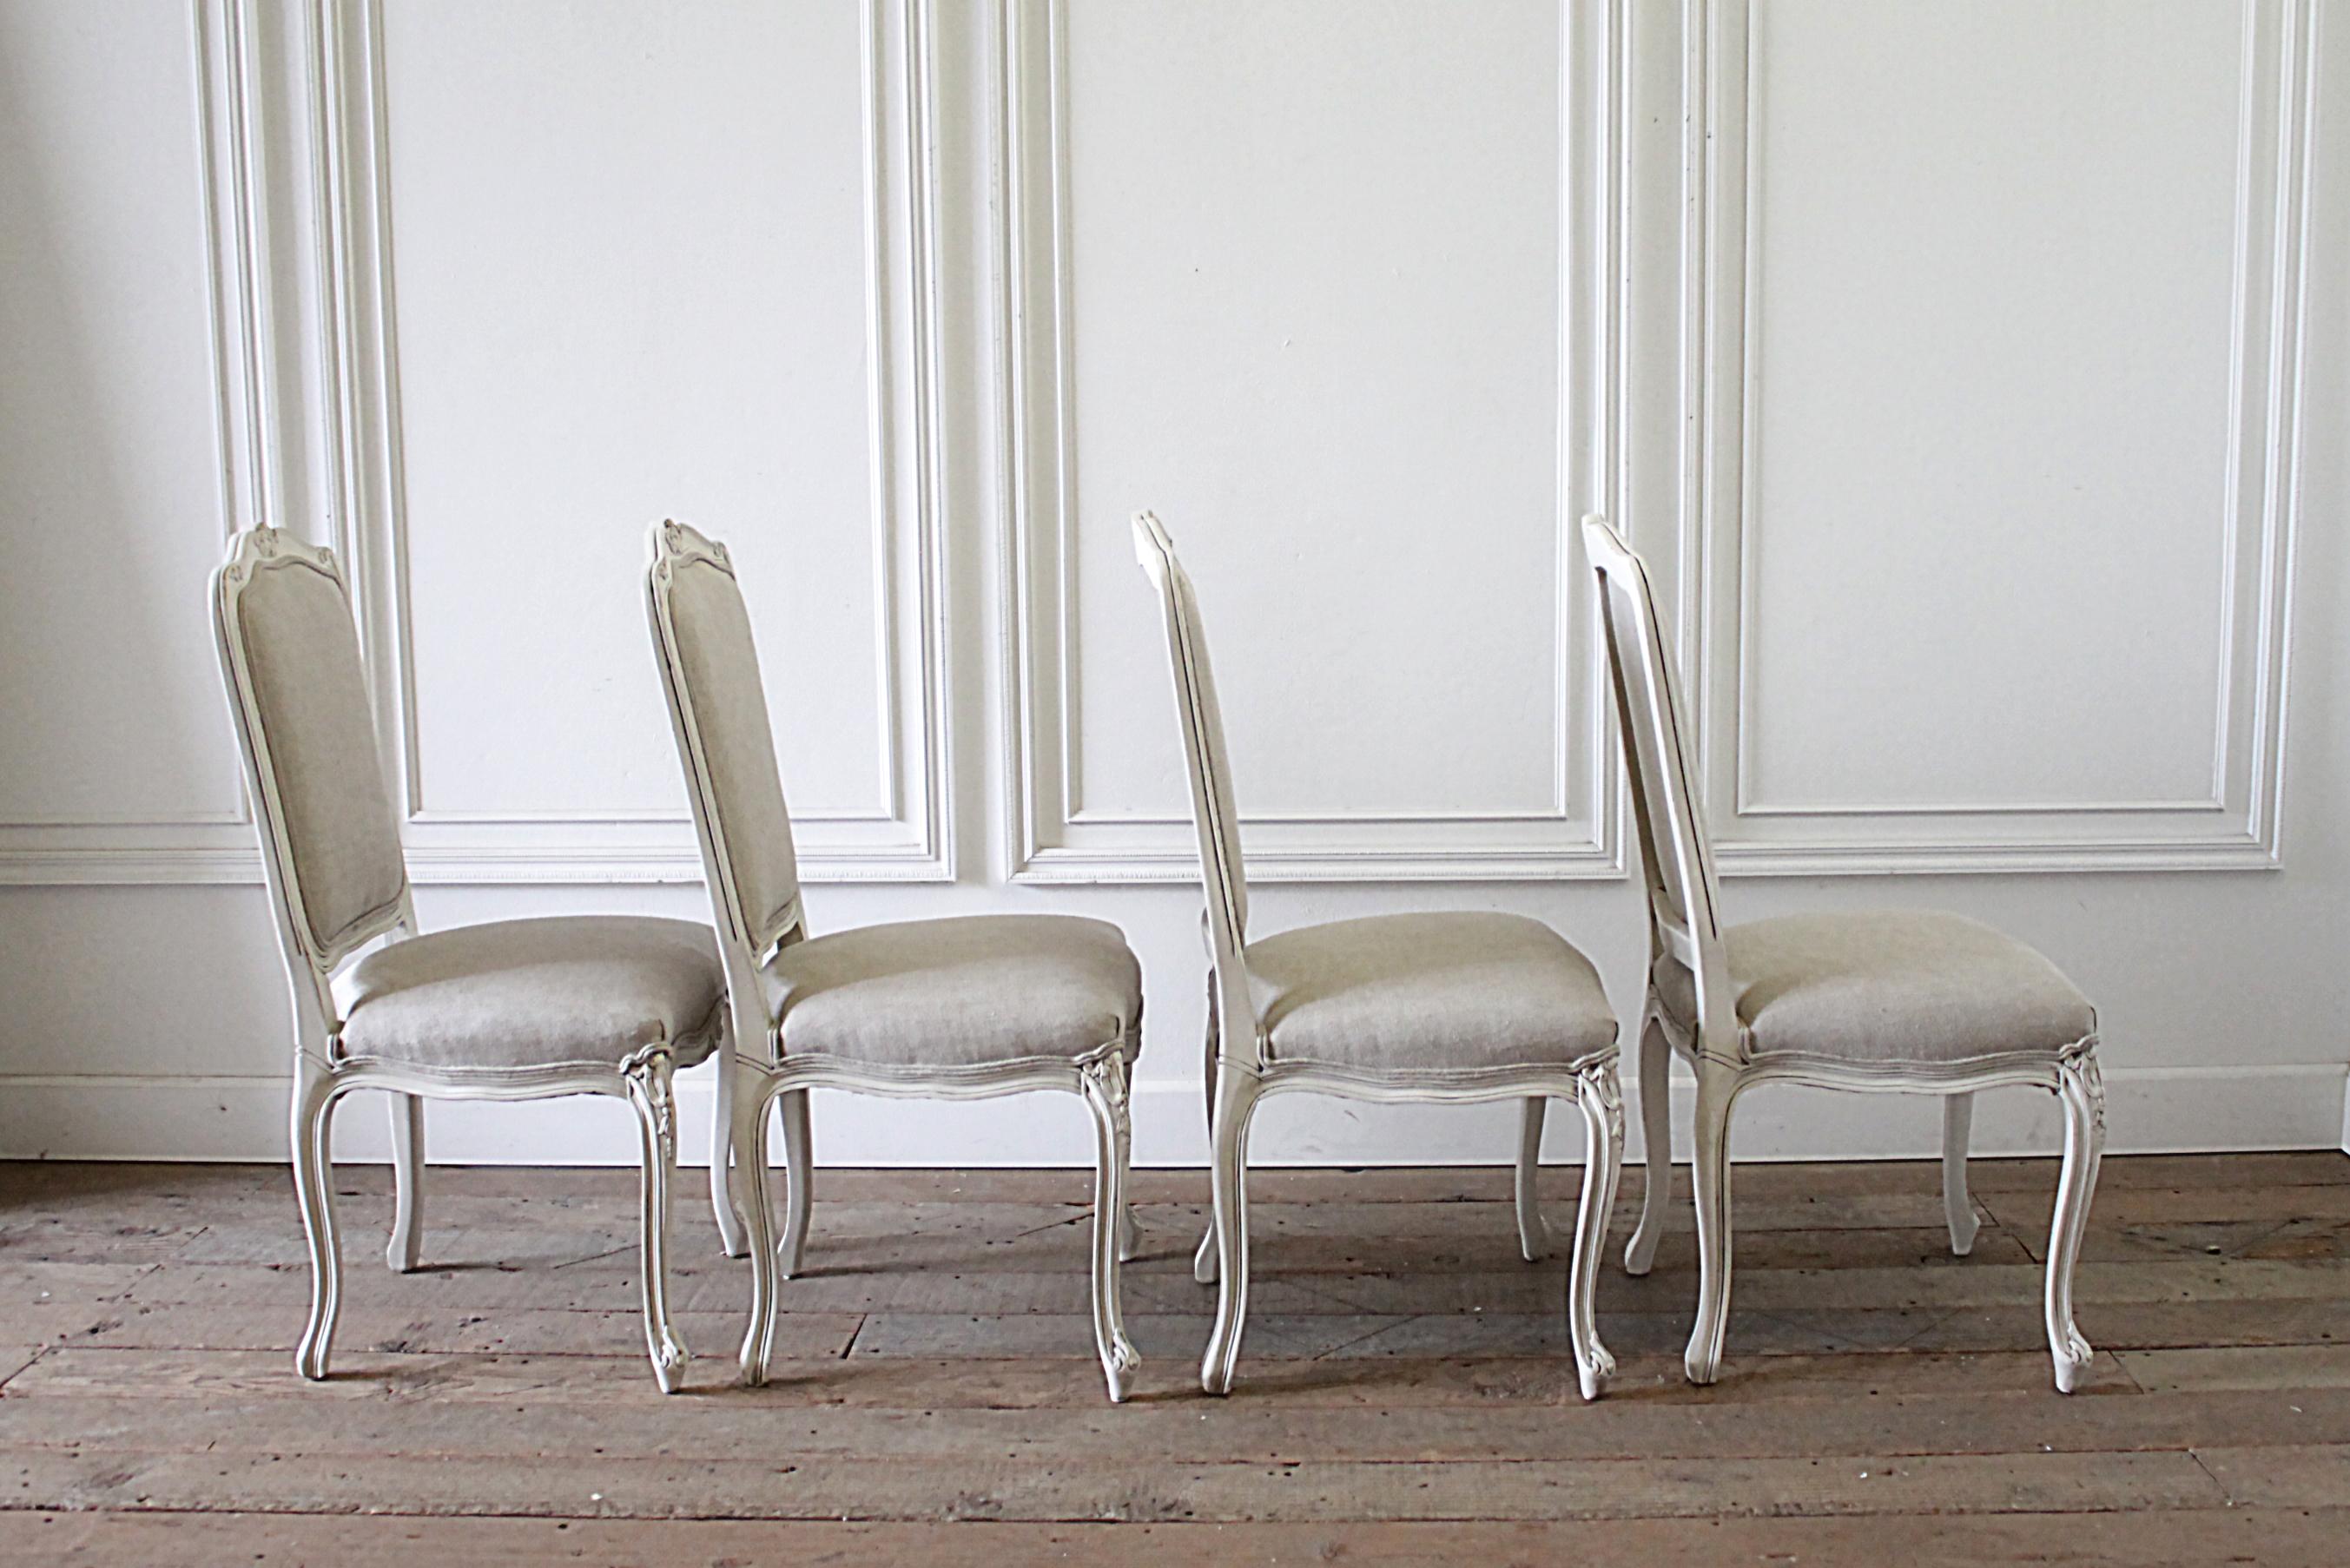 European 20th Century Set of 6 French Country Painted and Linen Upholstered Dining Chairs